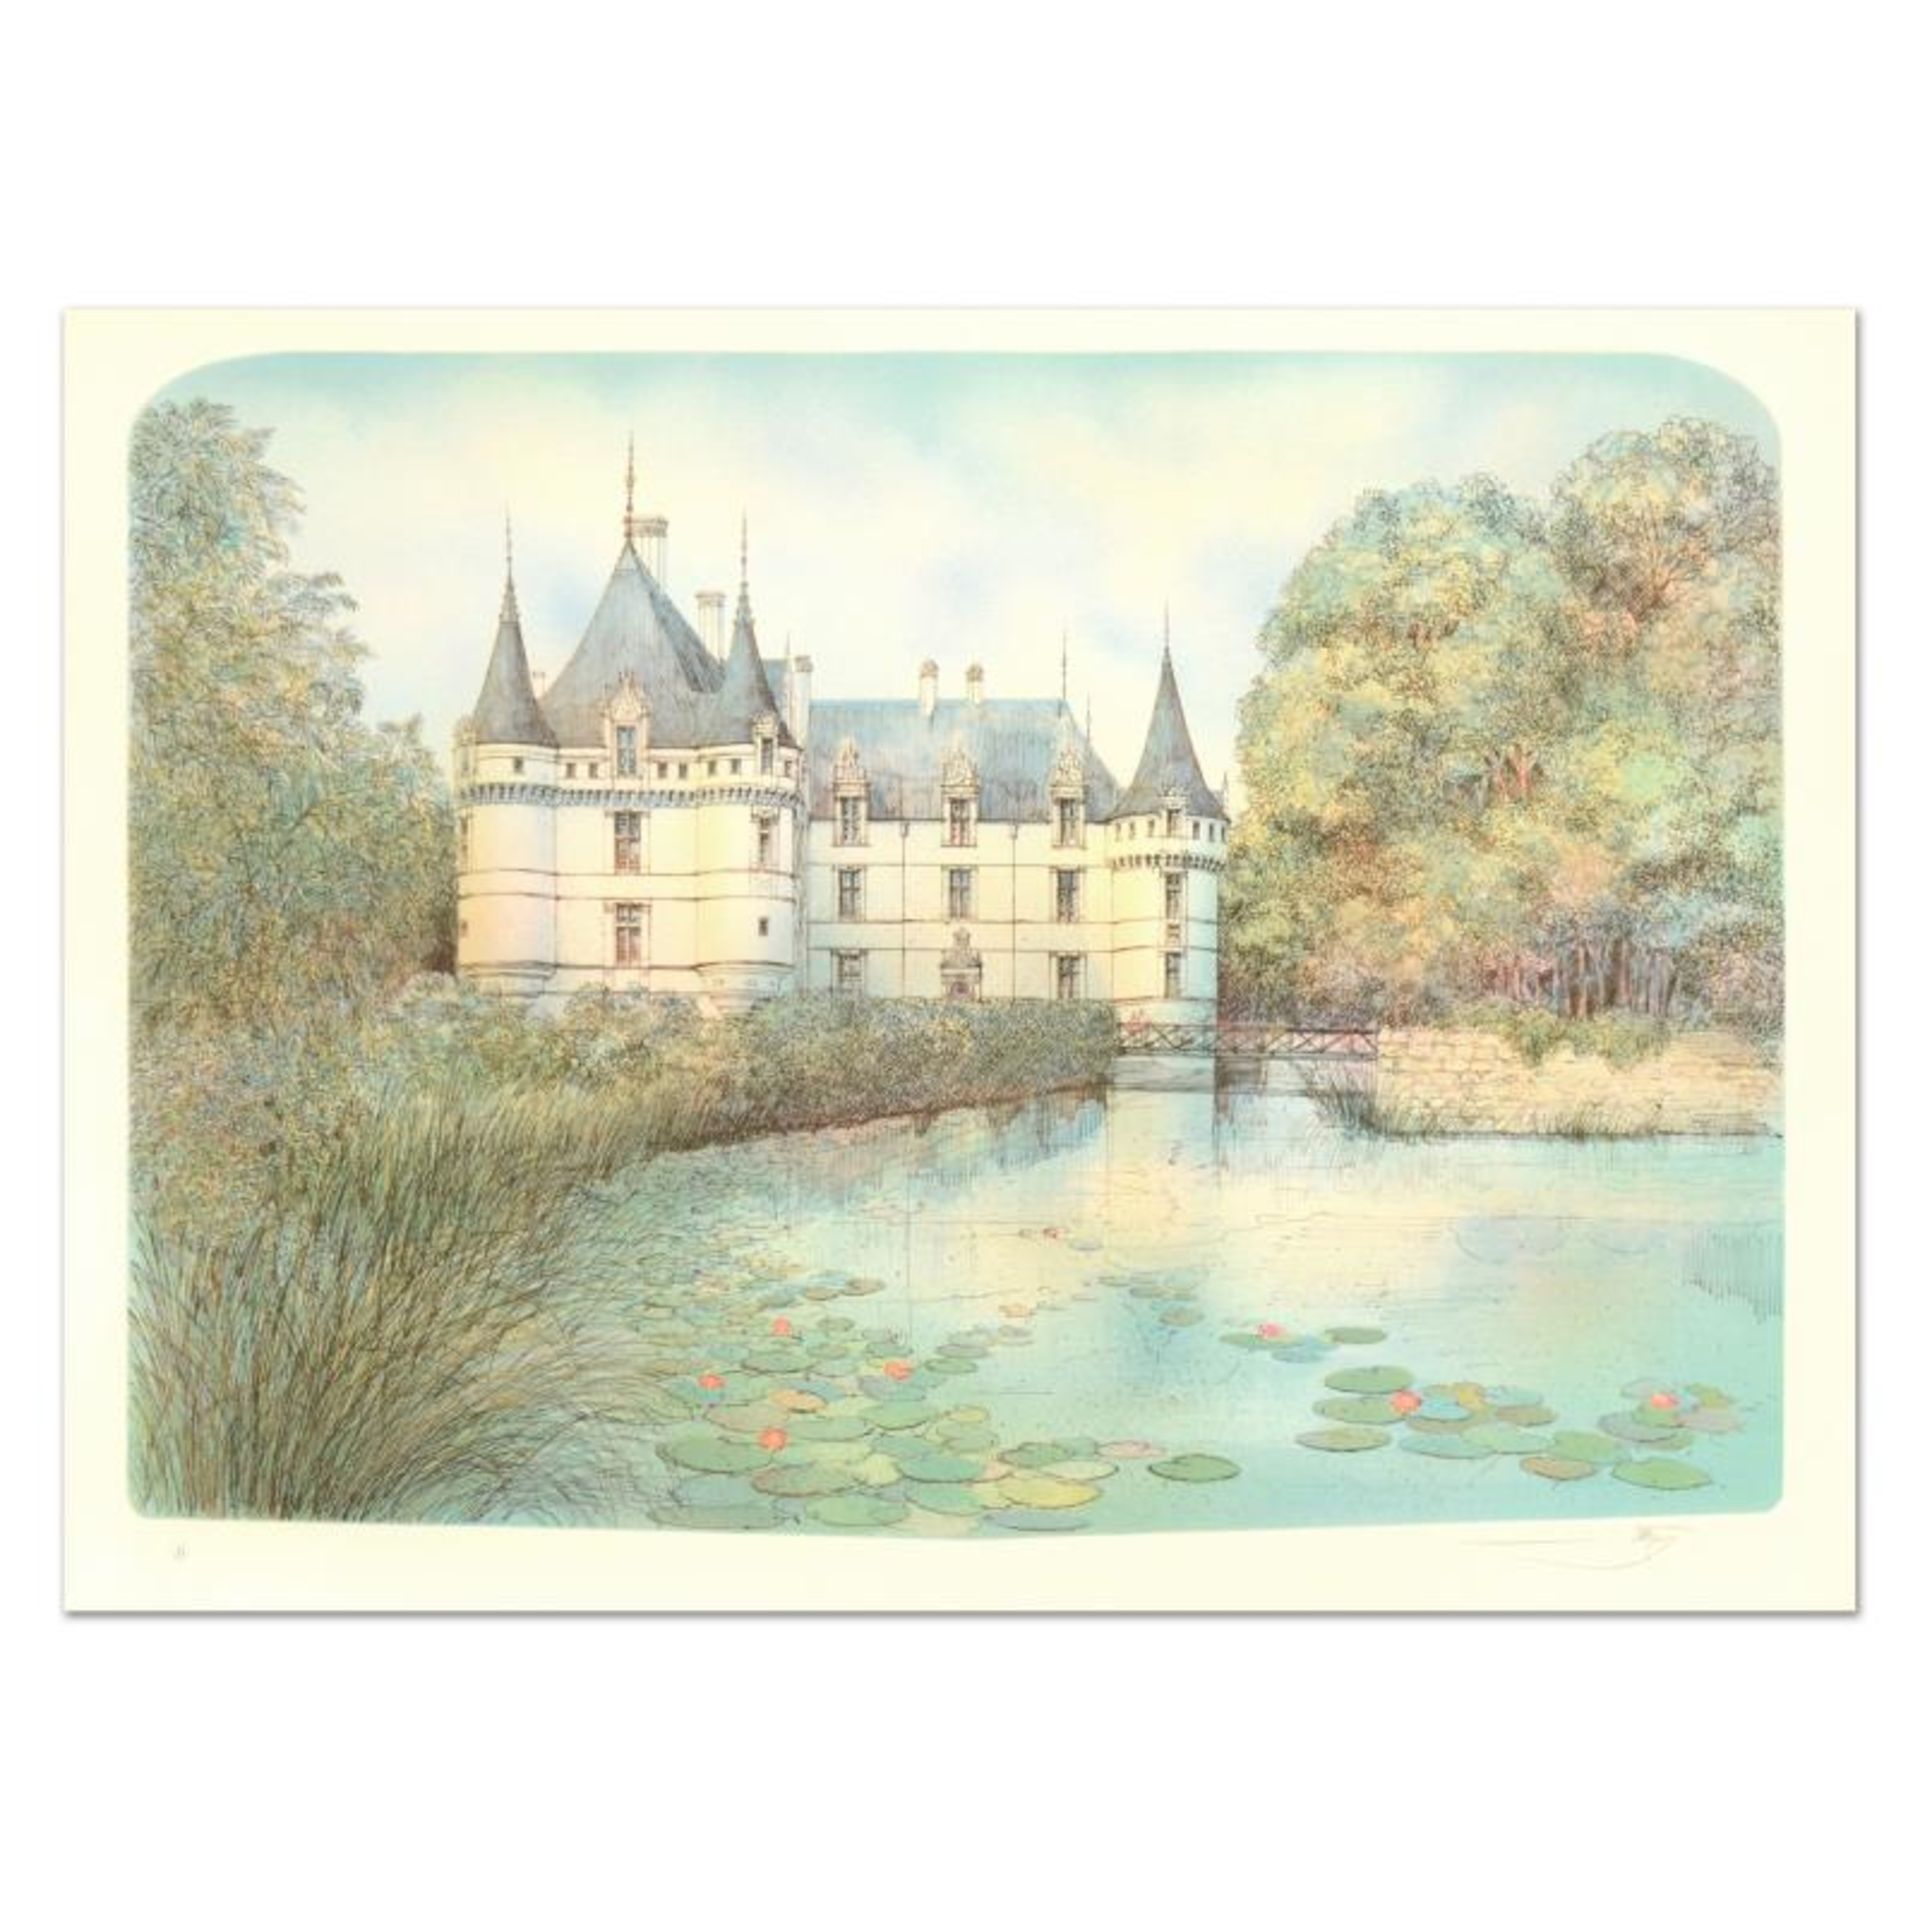 Rolf Rafflewski, "Chateau II" Limited Edition Lithograph, Numbered and Hand Sign